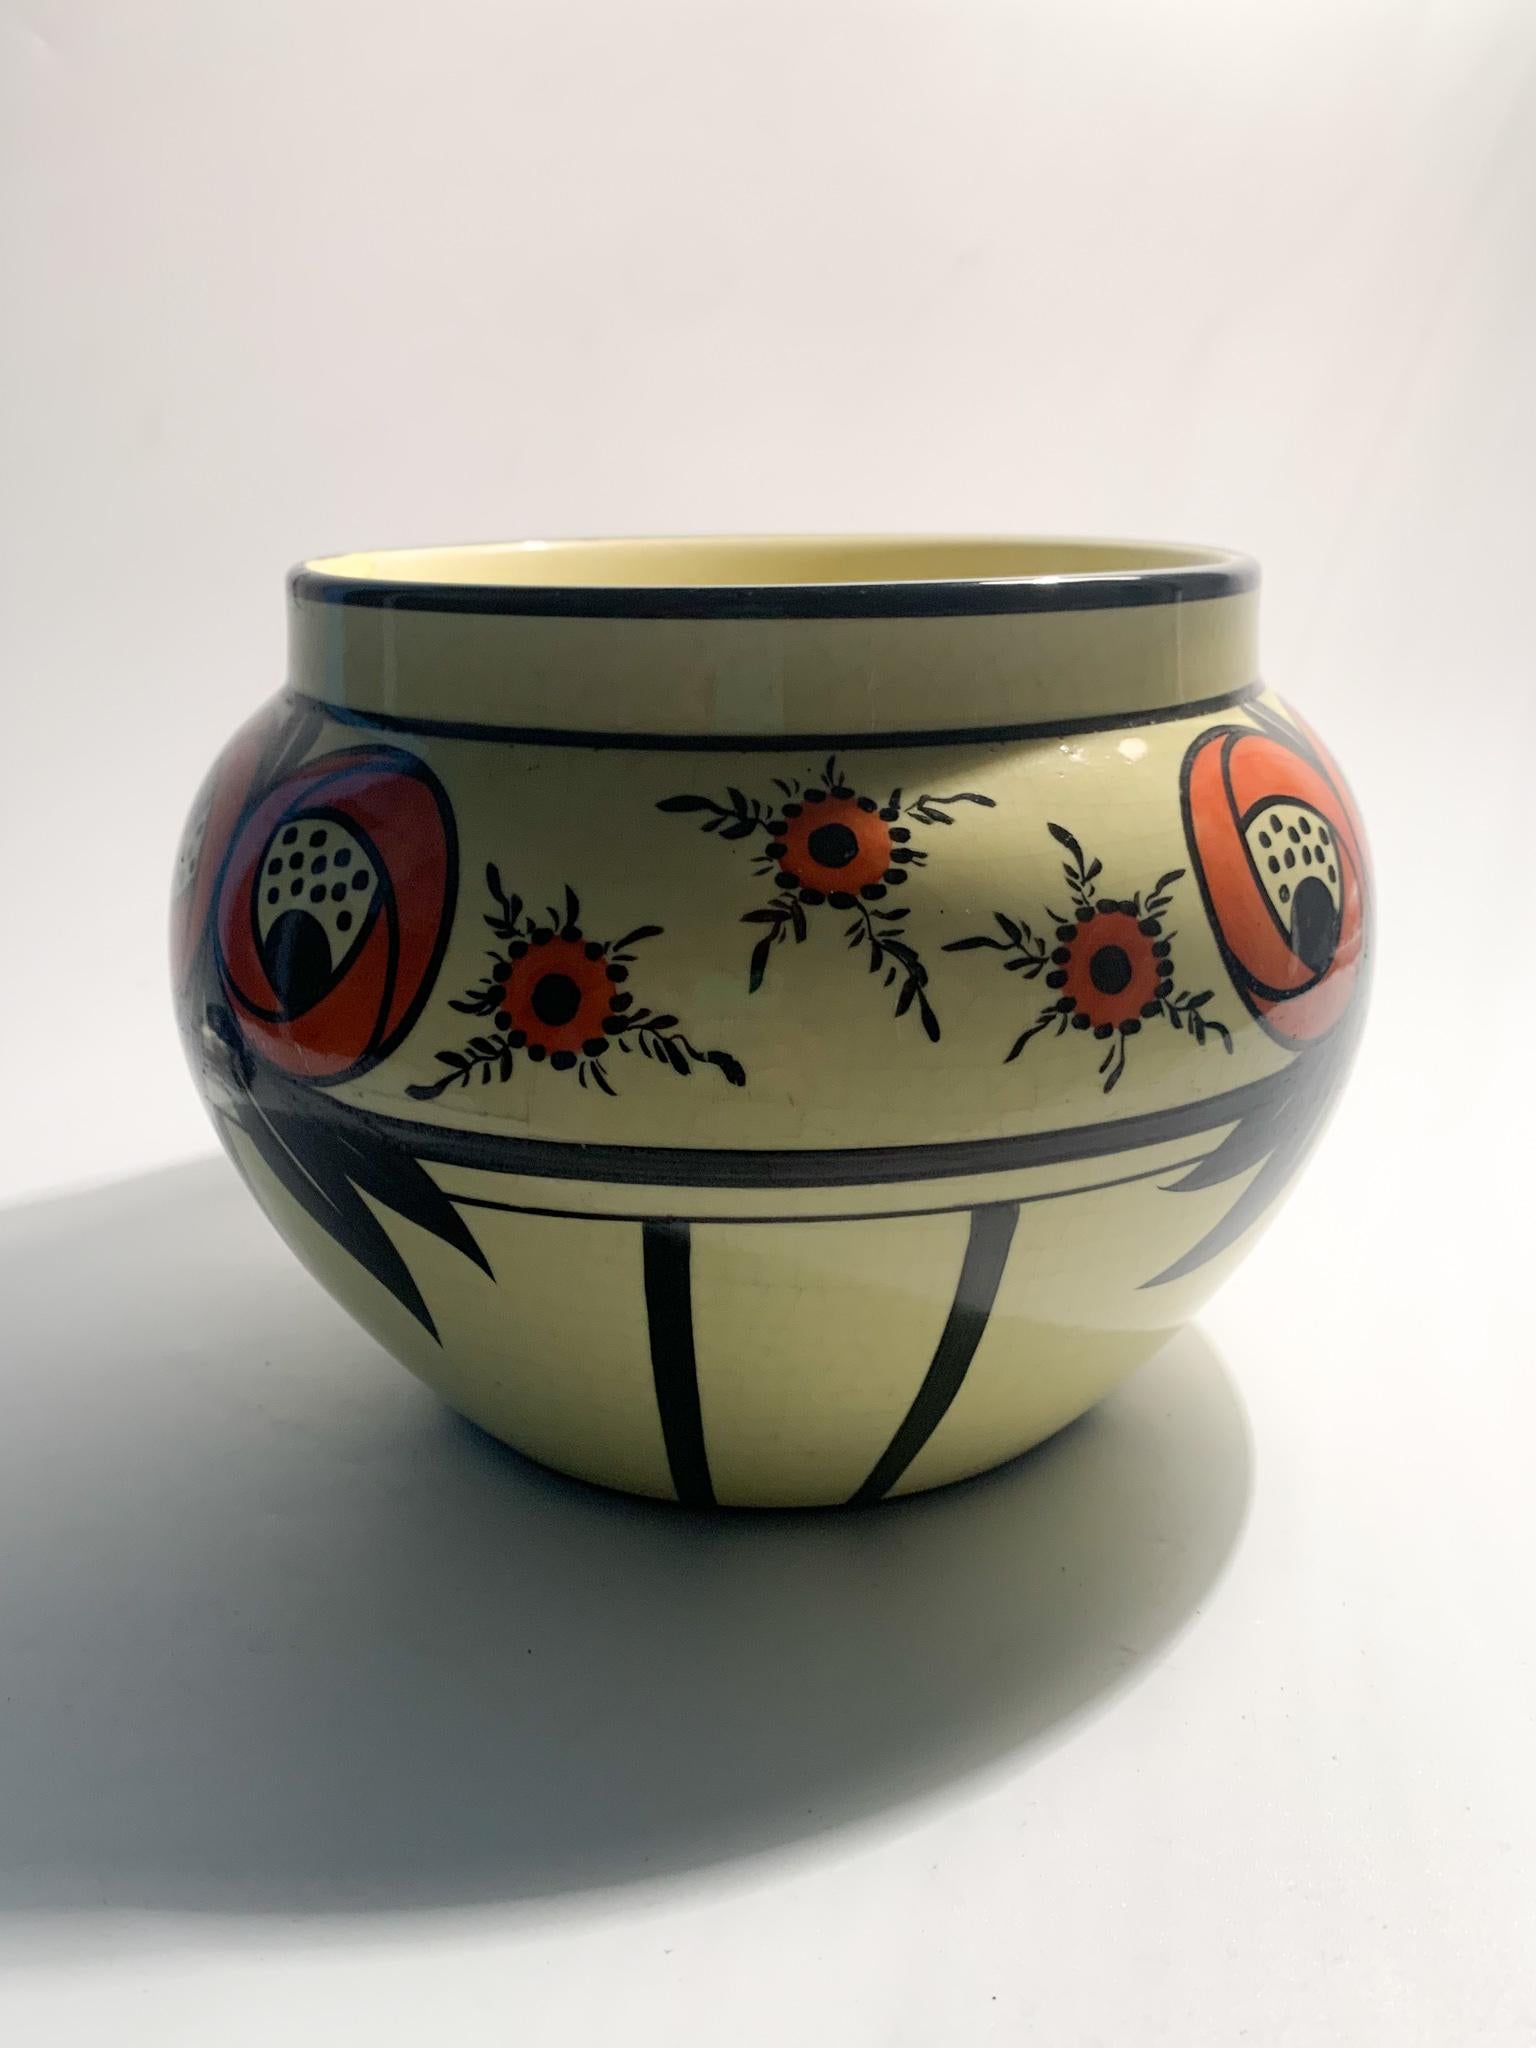 Yellow and Orange Ceramic Vase / Cachepot made by SC Richard in the 1890s. The vase has had a slight repair as shown in the photos. Additional photographic material on request.

diameter cm 21 h cm 16